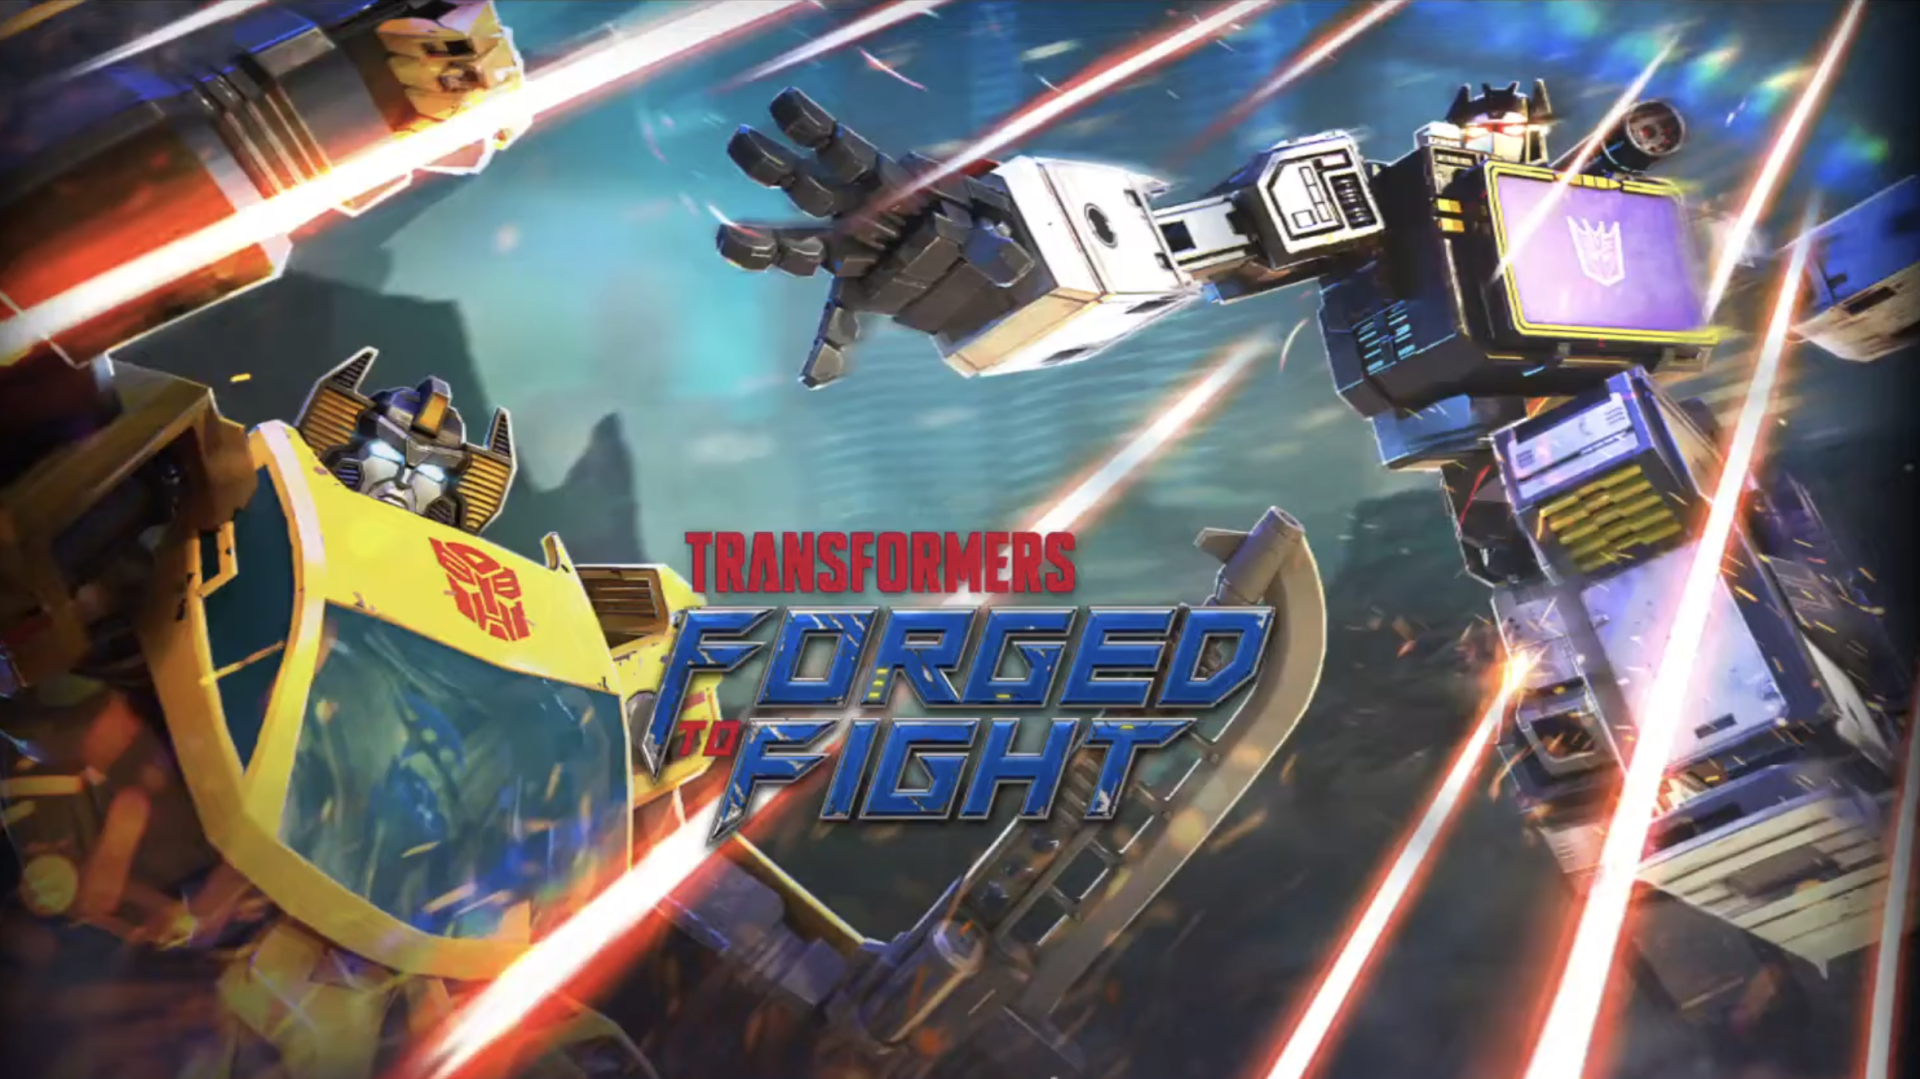 Transformers Forged To Fight